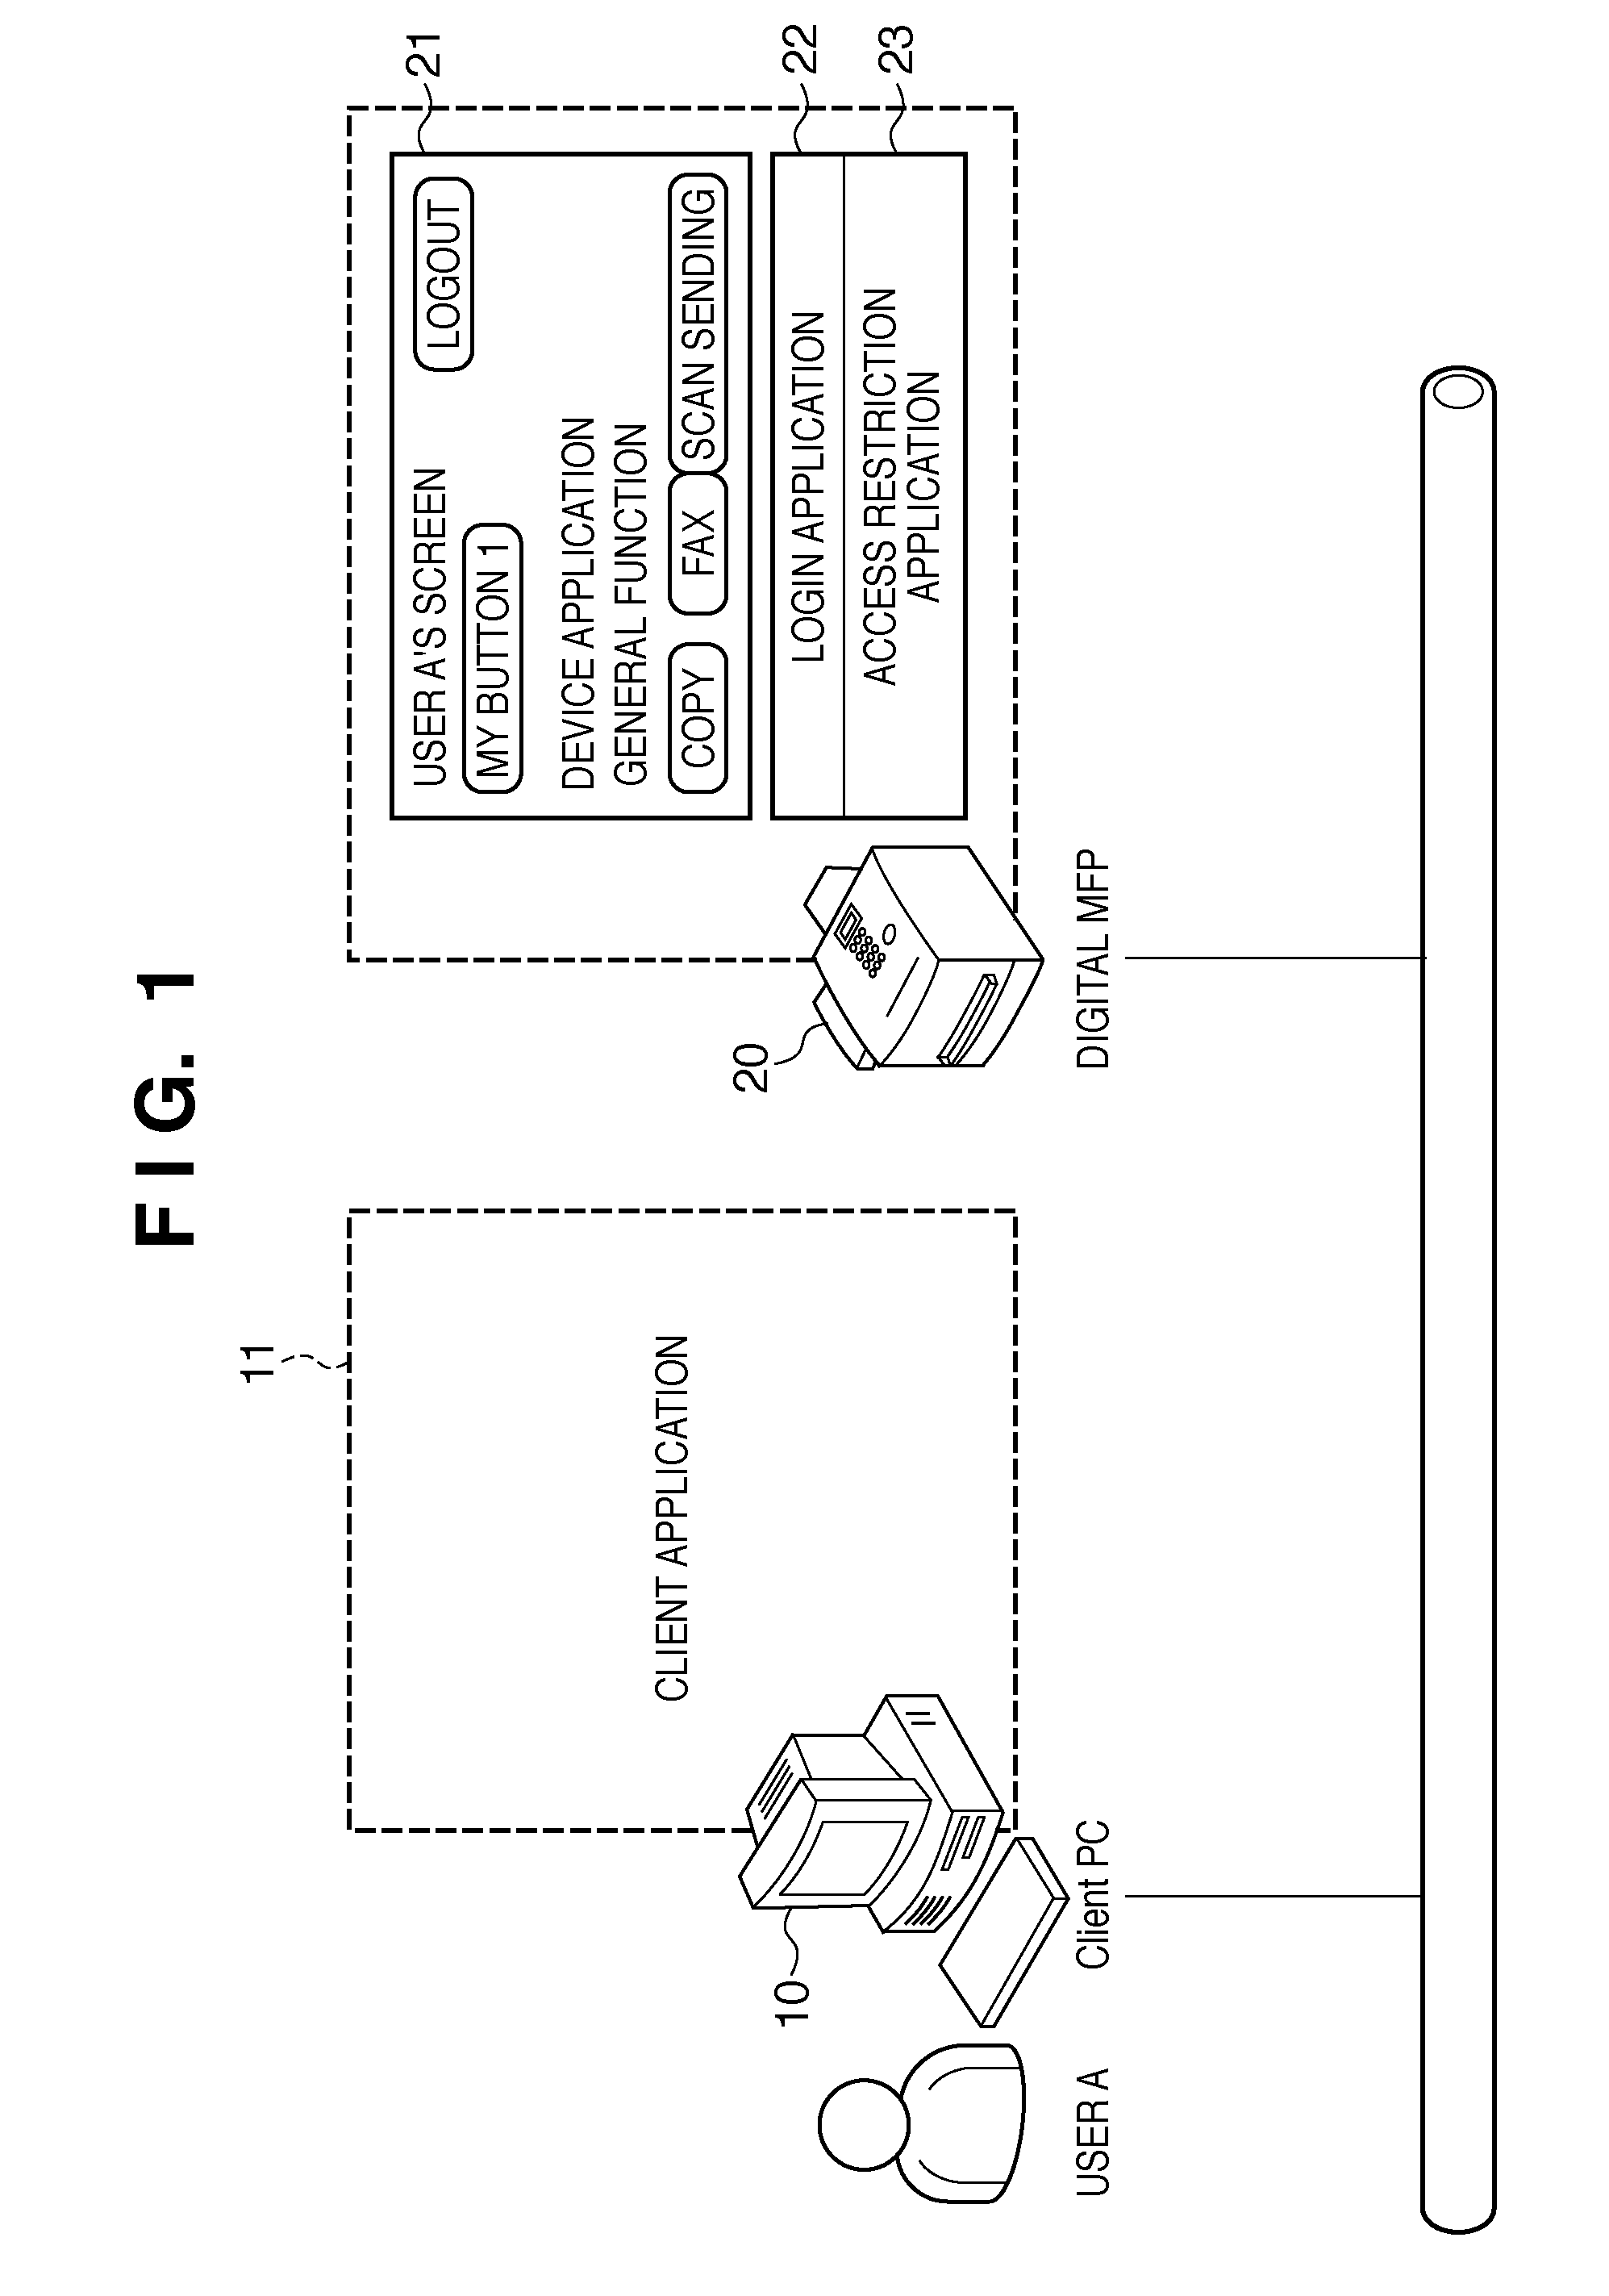 Image processing apparatus and control method for temporarily releasing a function restriction under a set condition